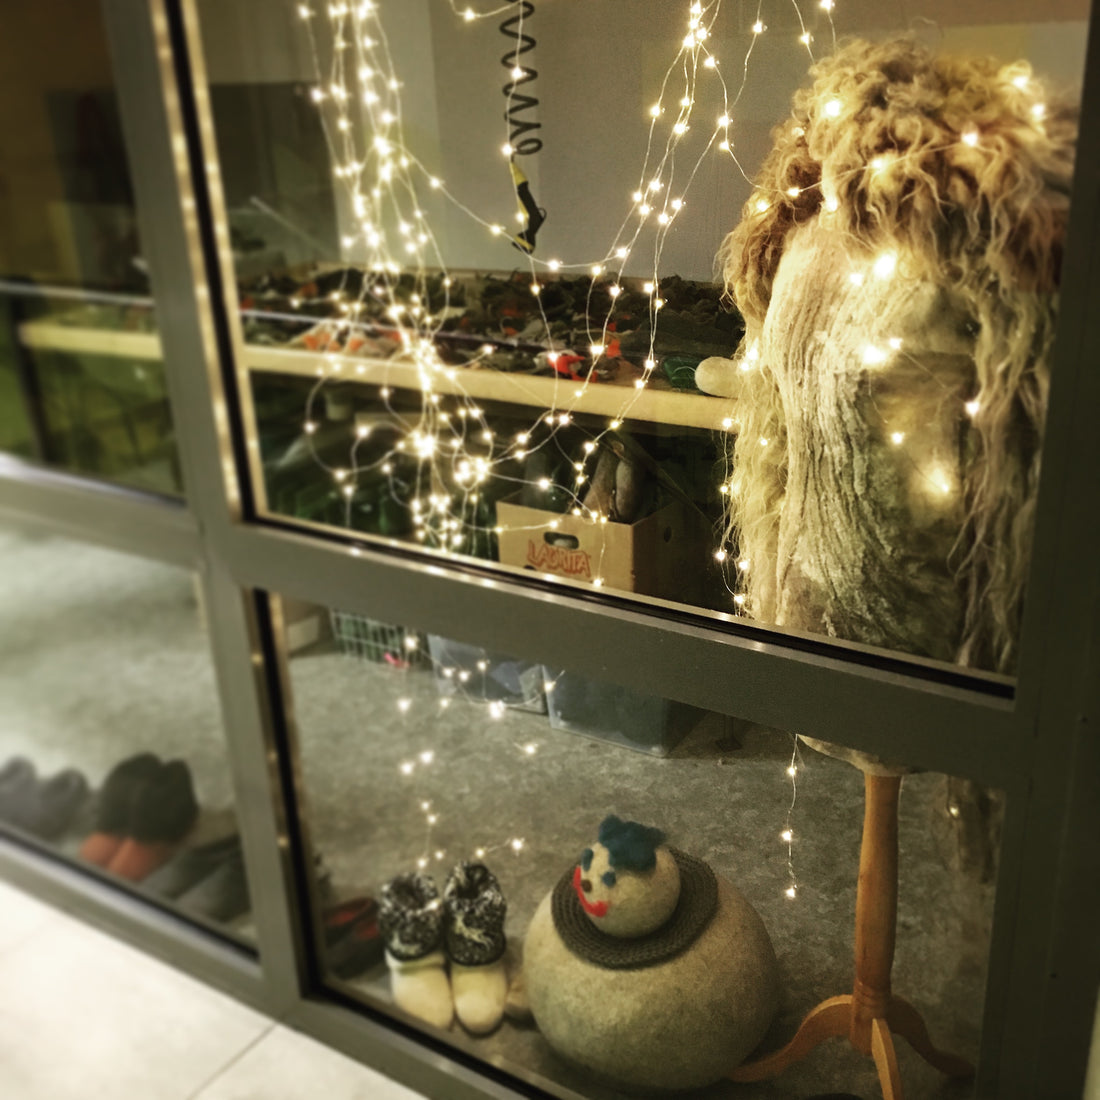 See how we decorated BURE BURE studio for Christmas